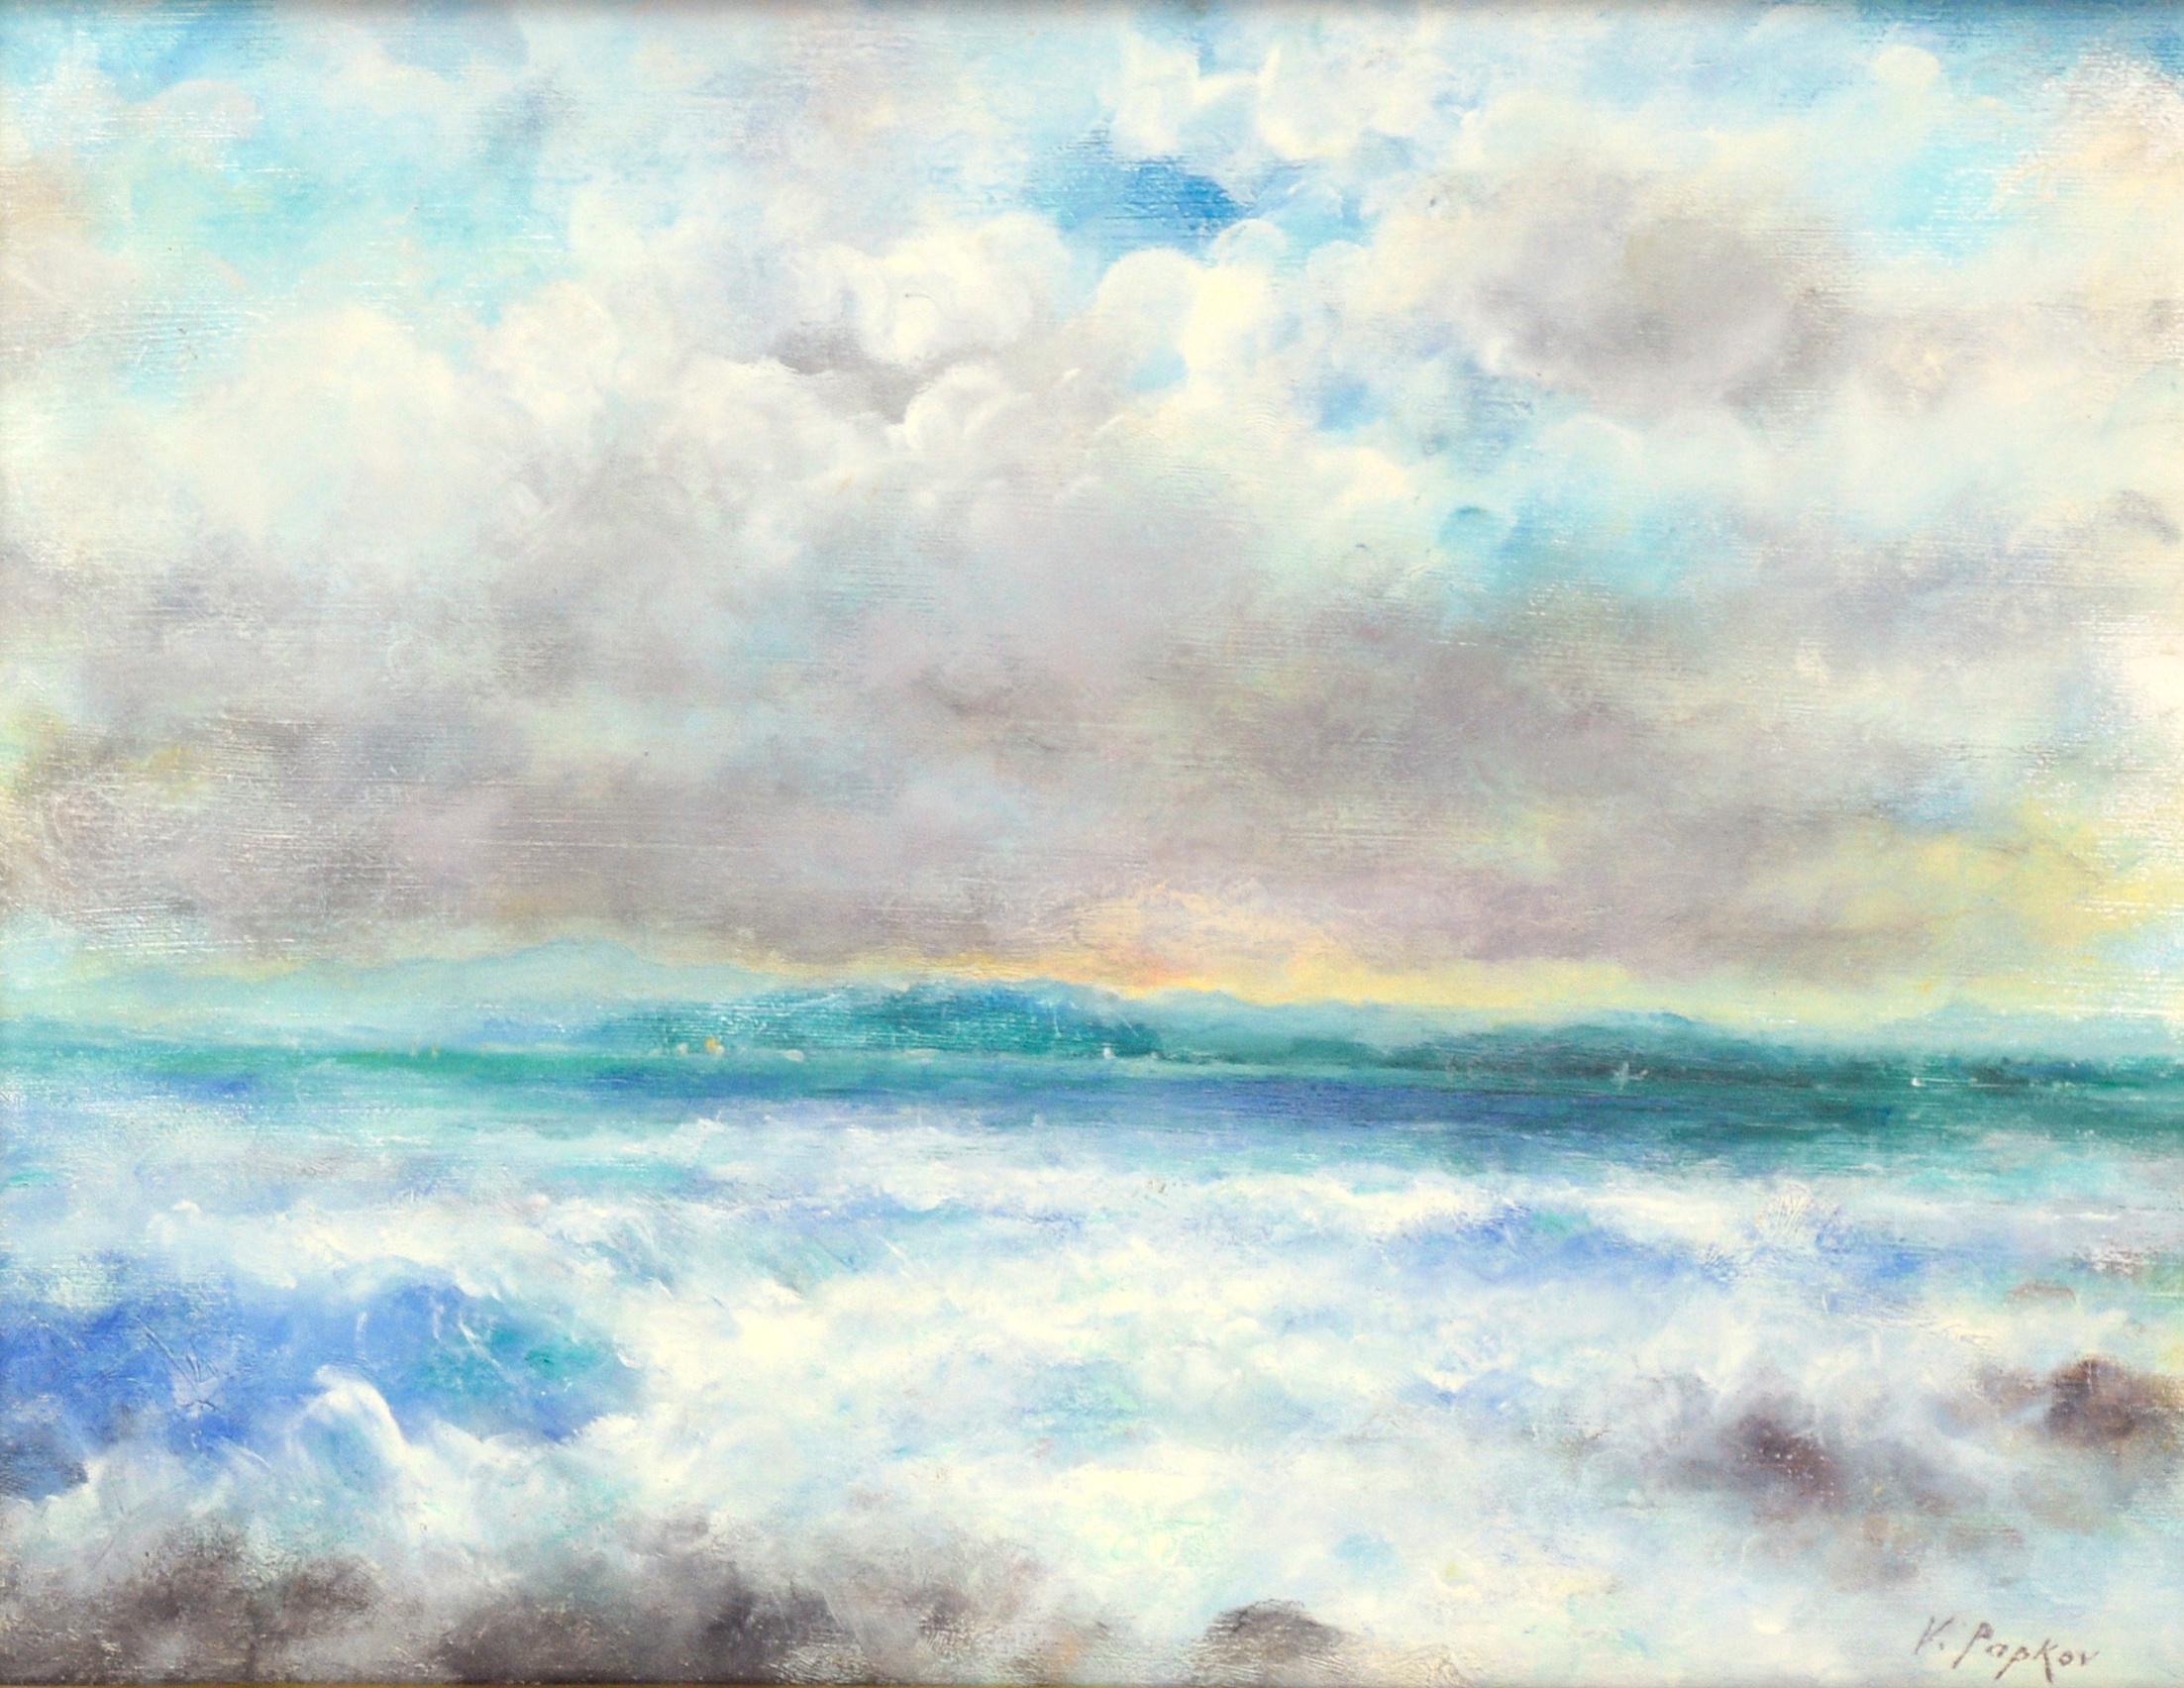 Sailboats in the Distance - Seascape - Painting by Vasil Papkov